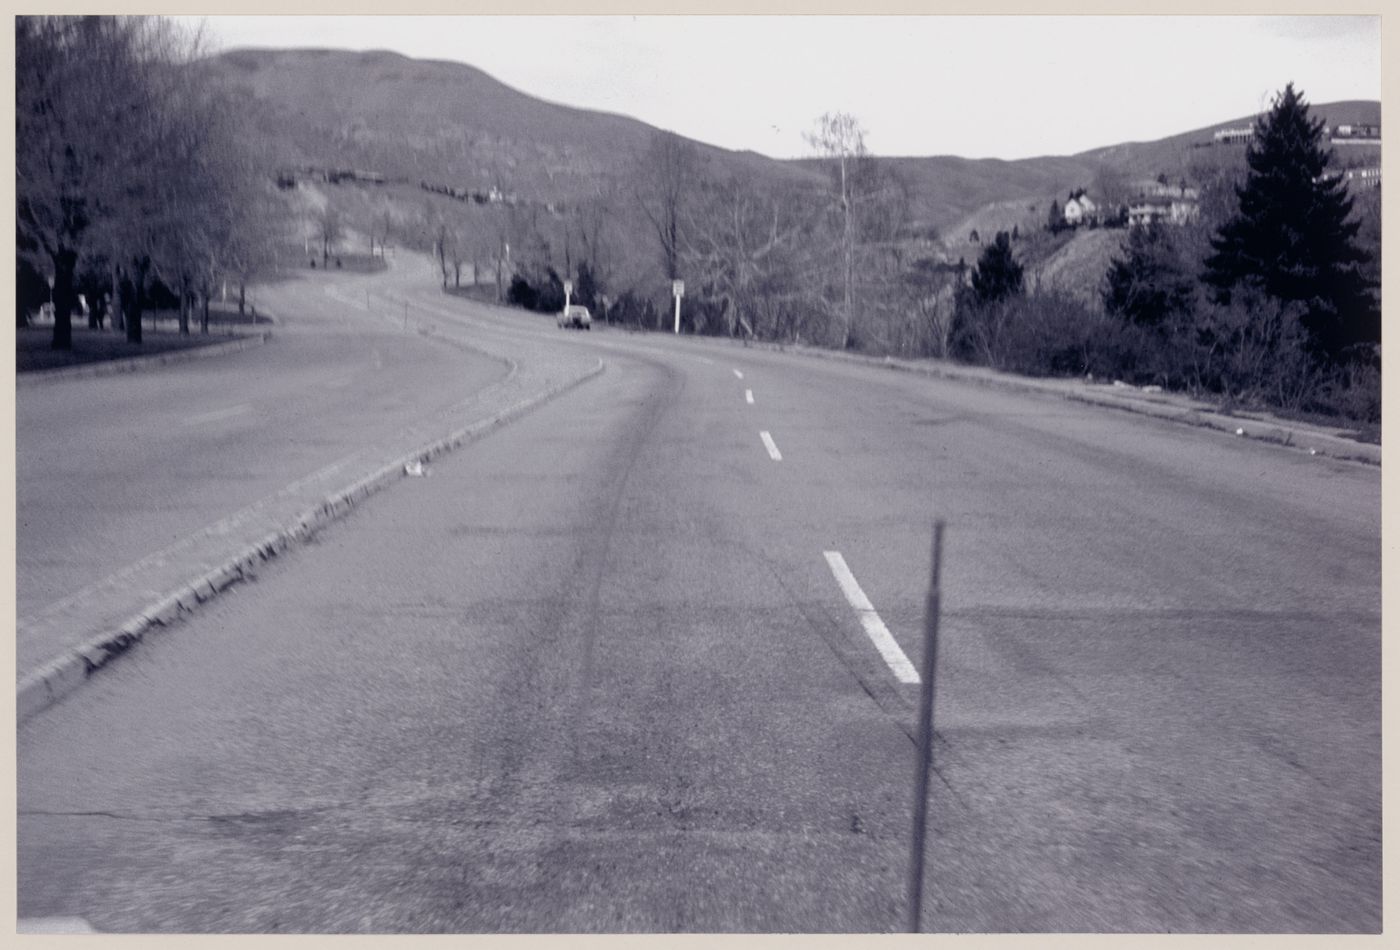 Photograph showing road for the Red Line project